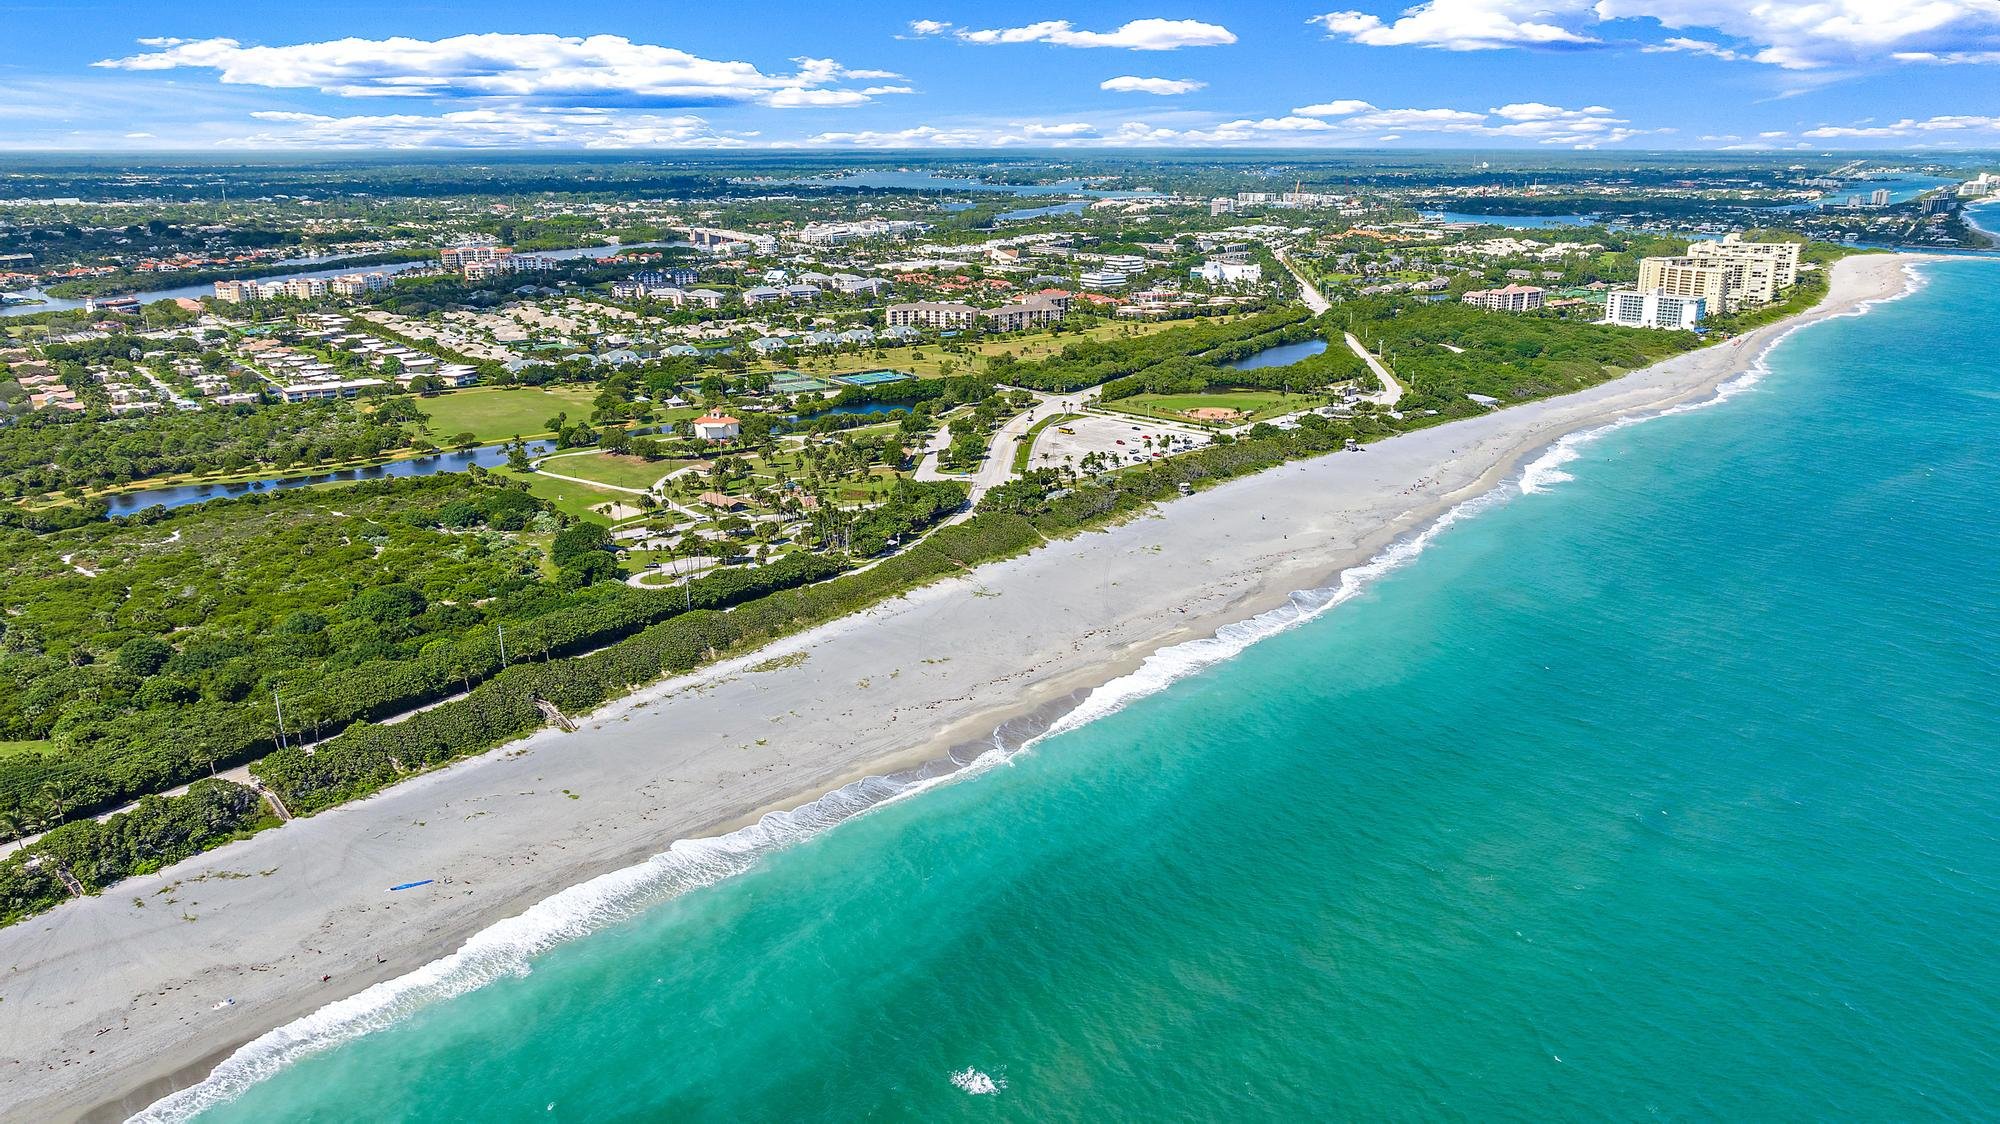 live steps from jupiter's stunning blue beaches in this condo 